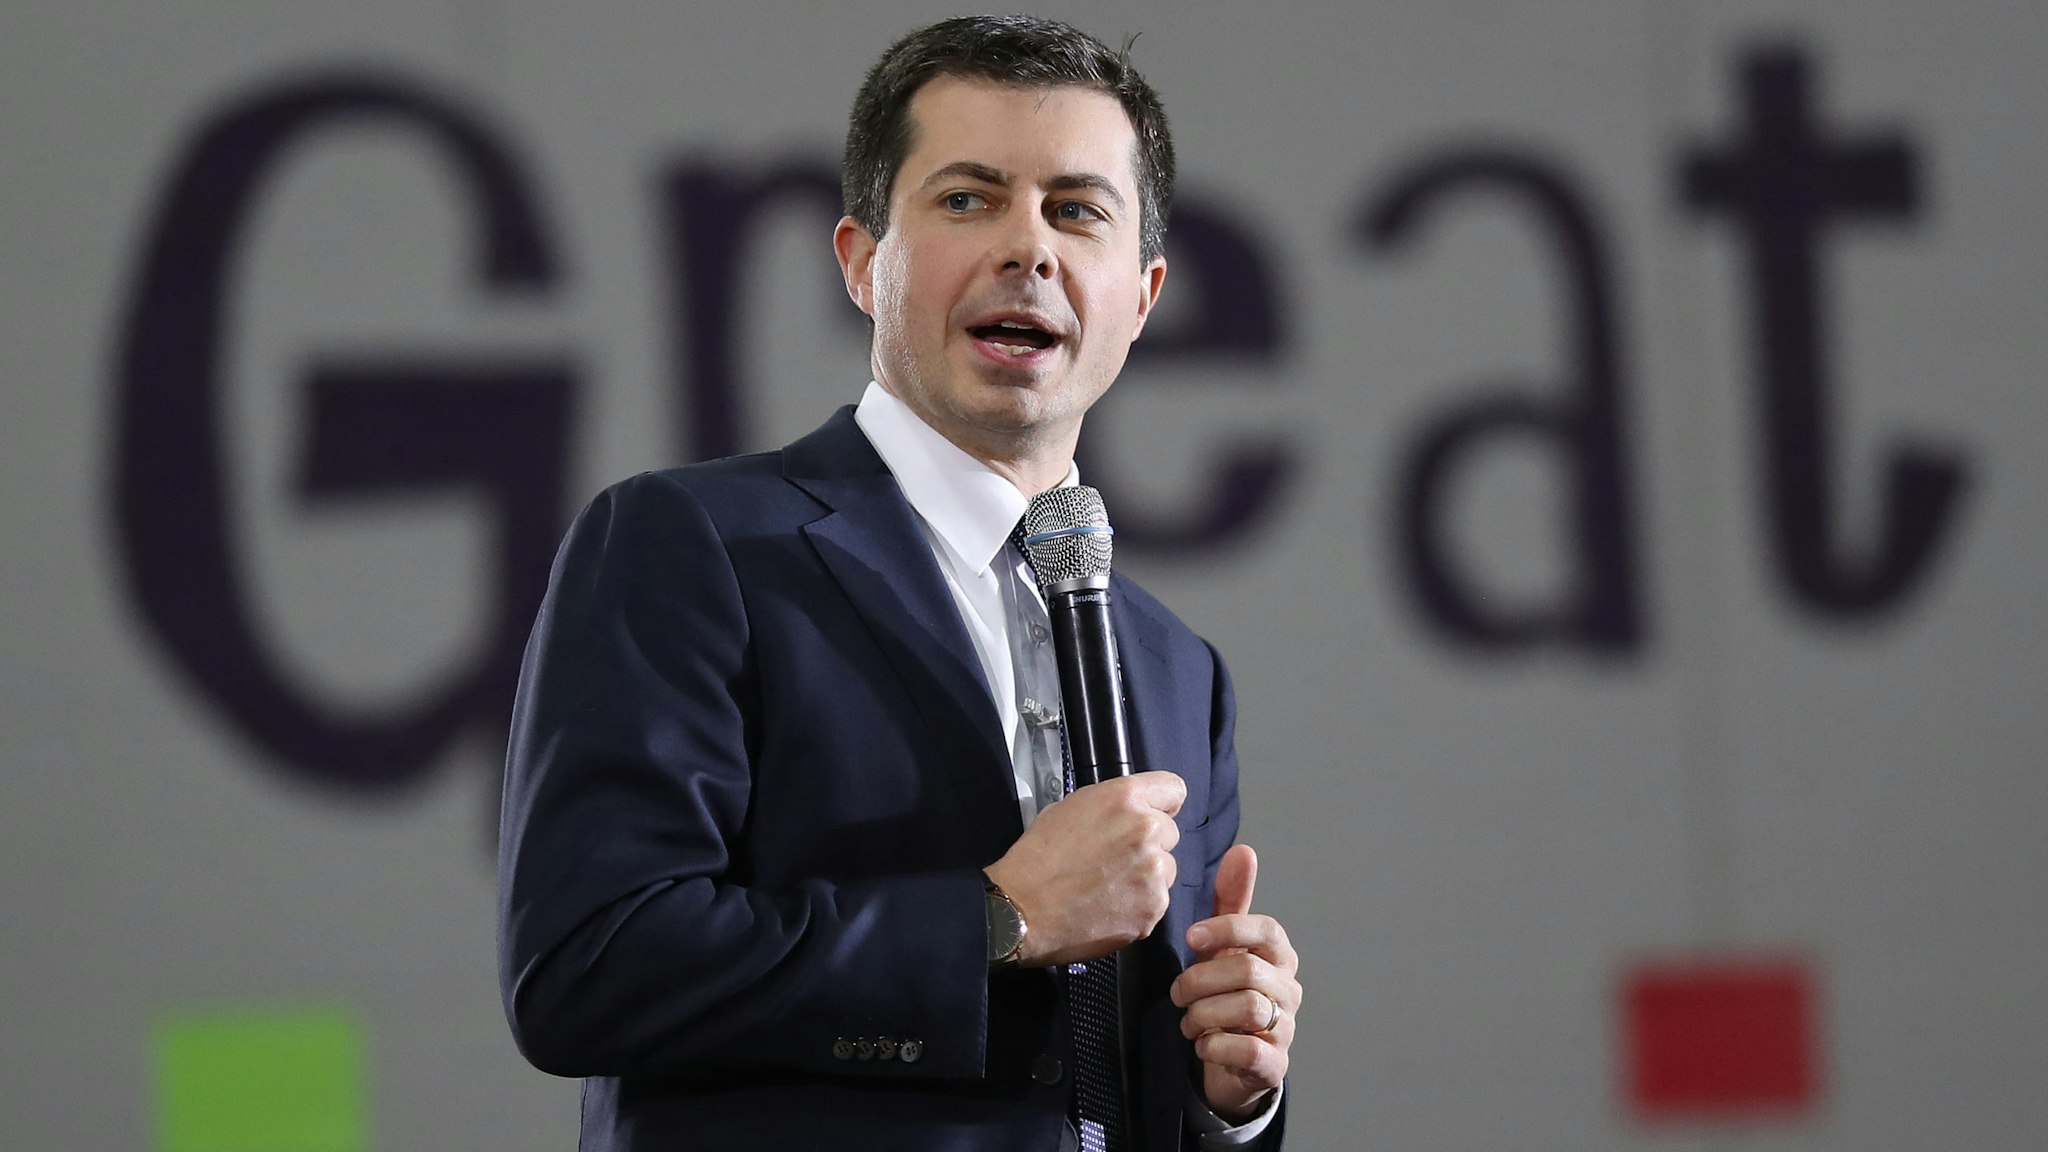 WEST DES MOINES, IOWA - JANUARY 26: Democratic presidential candidate former South Bend, Indiana Mayor Pete Buttigieg speaks at a Town Hall event at Maple Grove Elementary School January 26, 2020 in West Des Moines, Iowa. Iowa holds the nation's first caucuses in eight days on February 3.